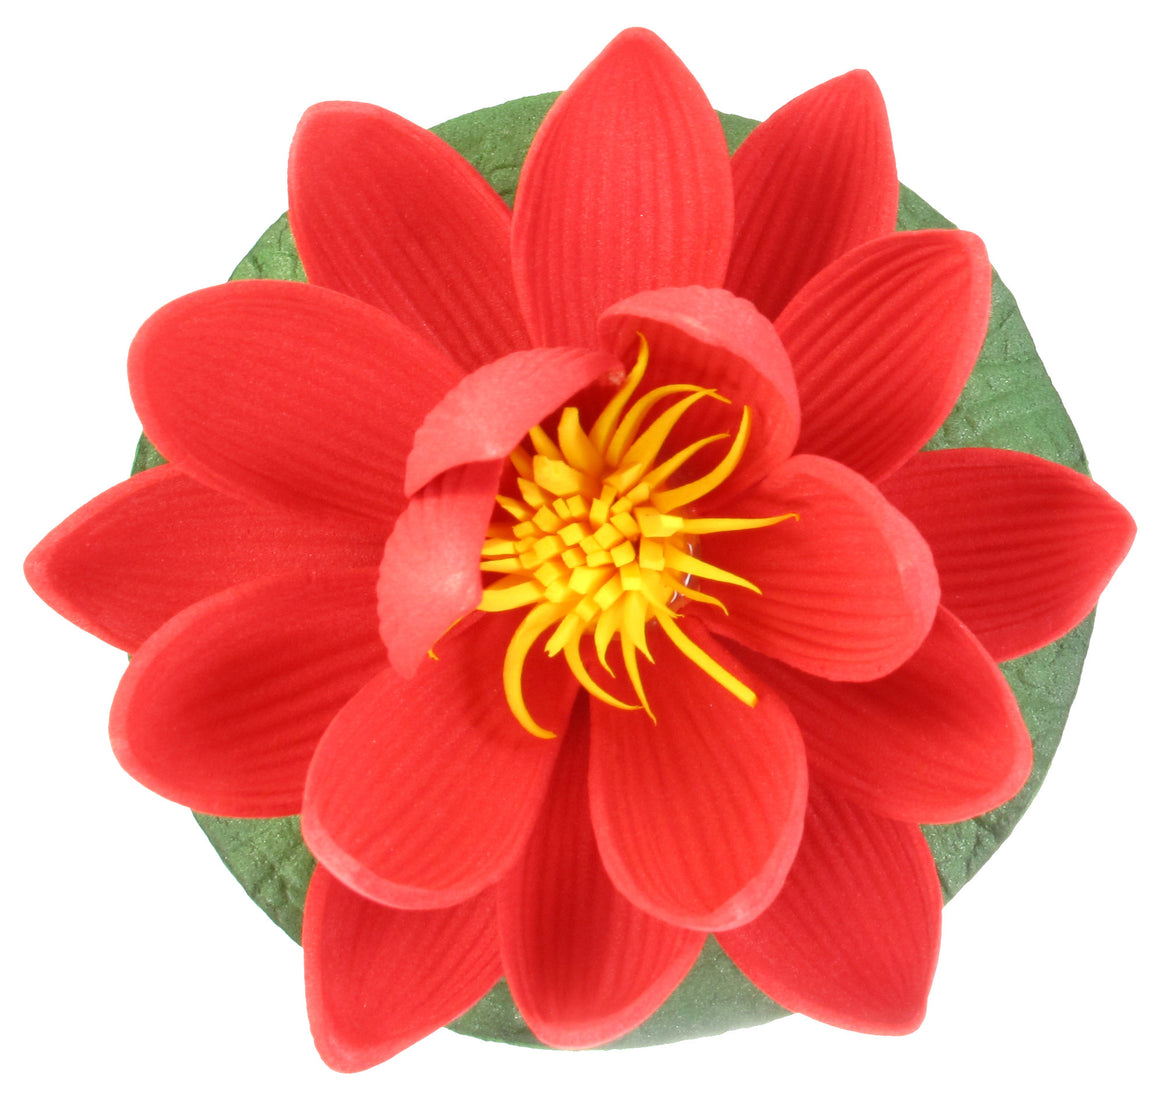 Small Floating Foam Water Lily Flower, For Small Water Feature, Approx. 3.25" x 3.25" x 2", Red - TropicaZona